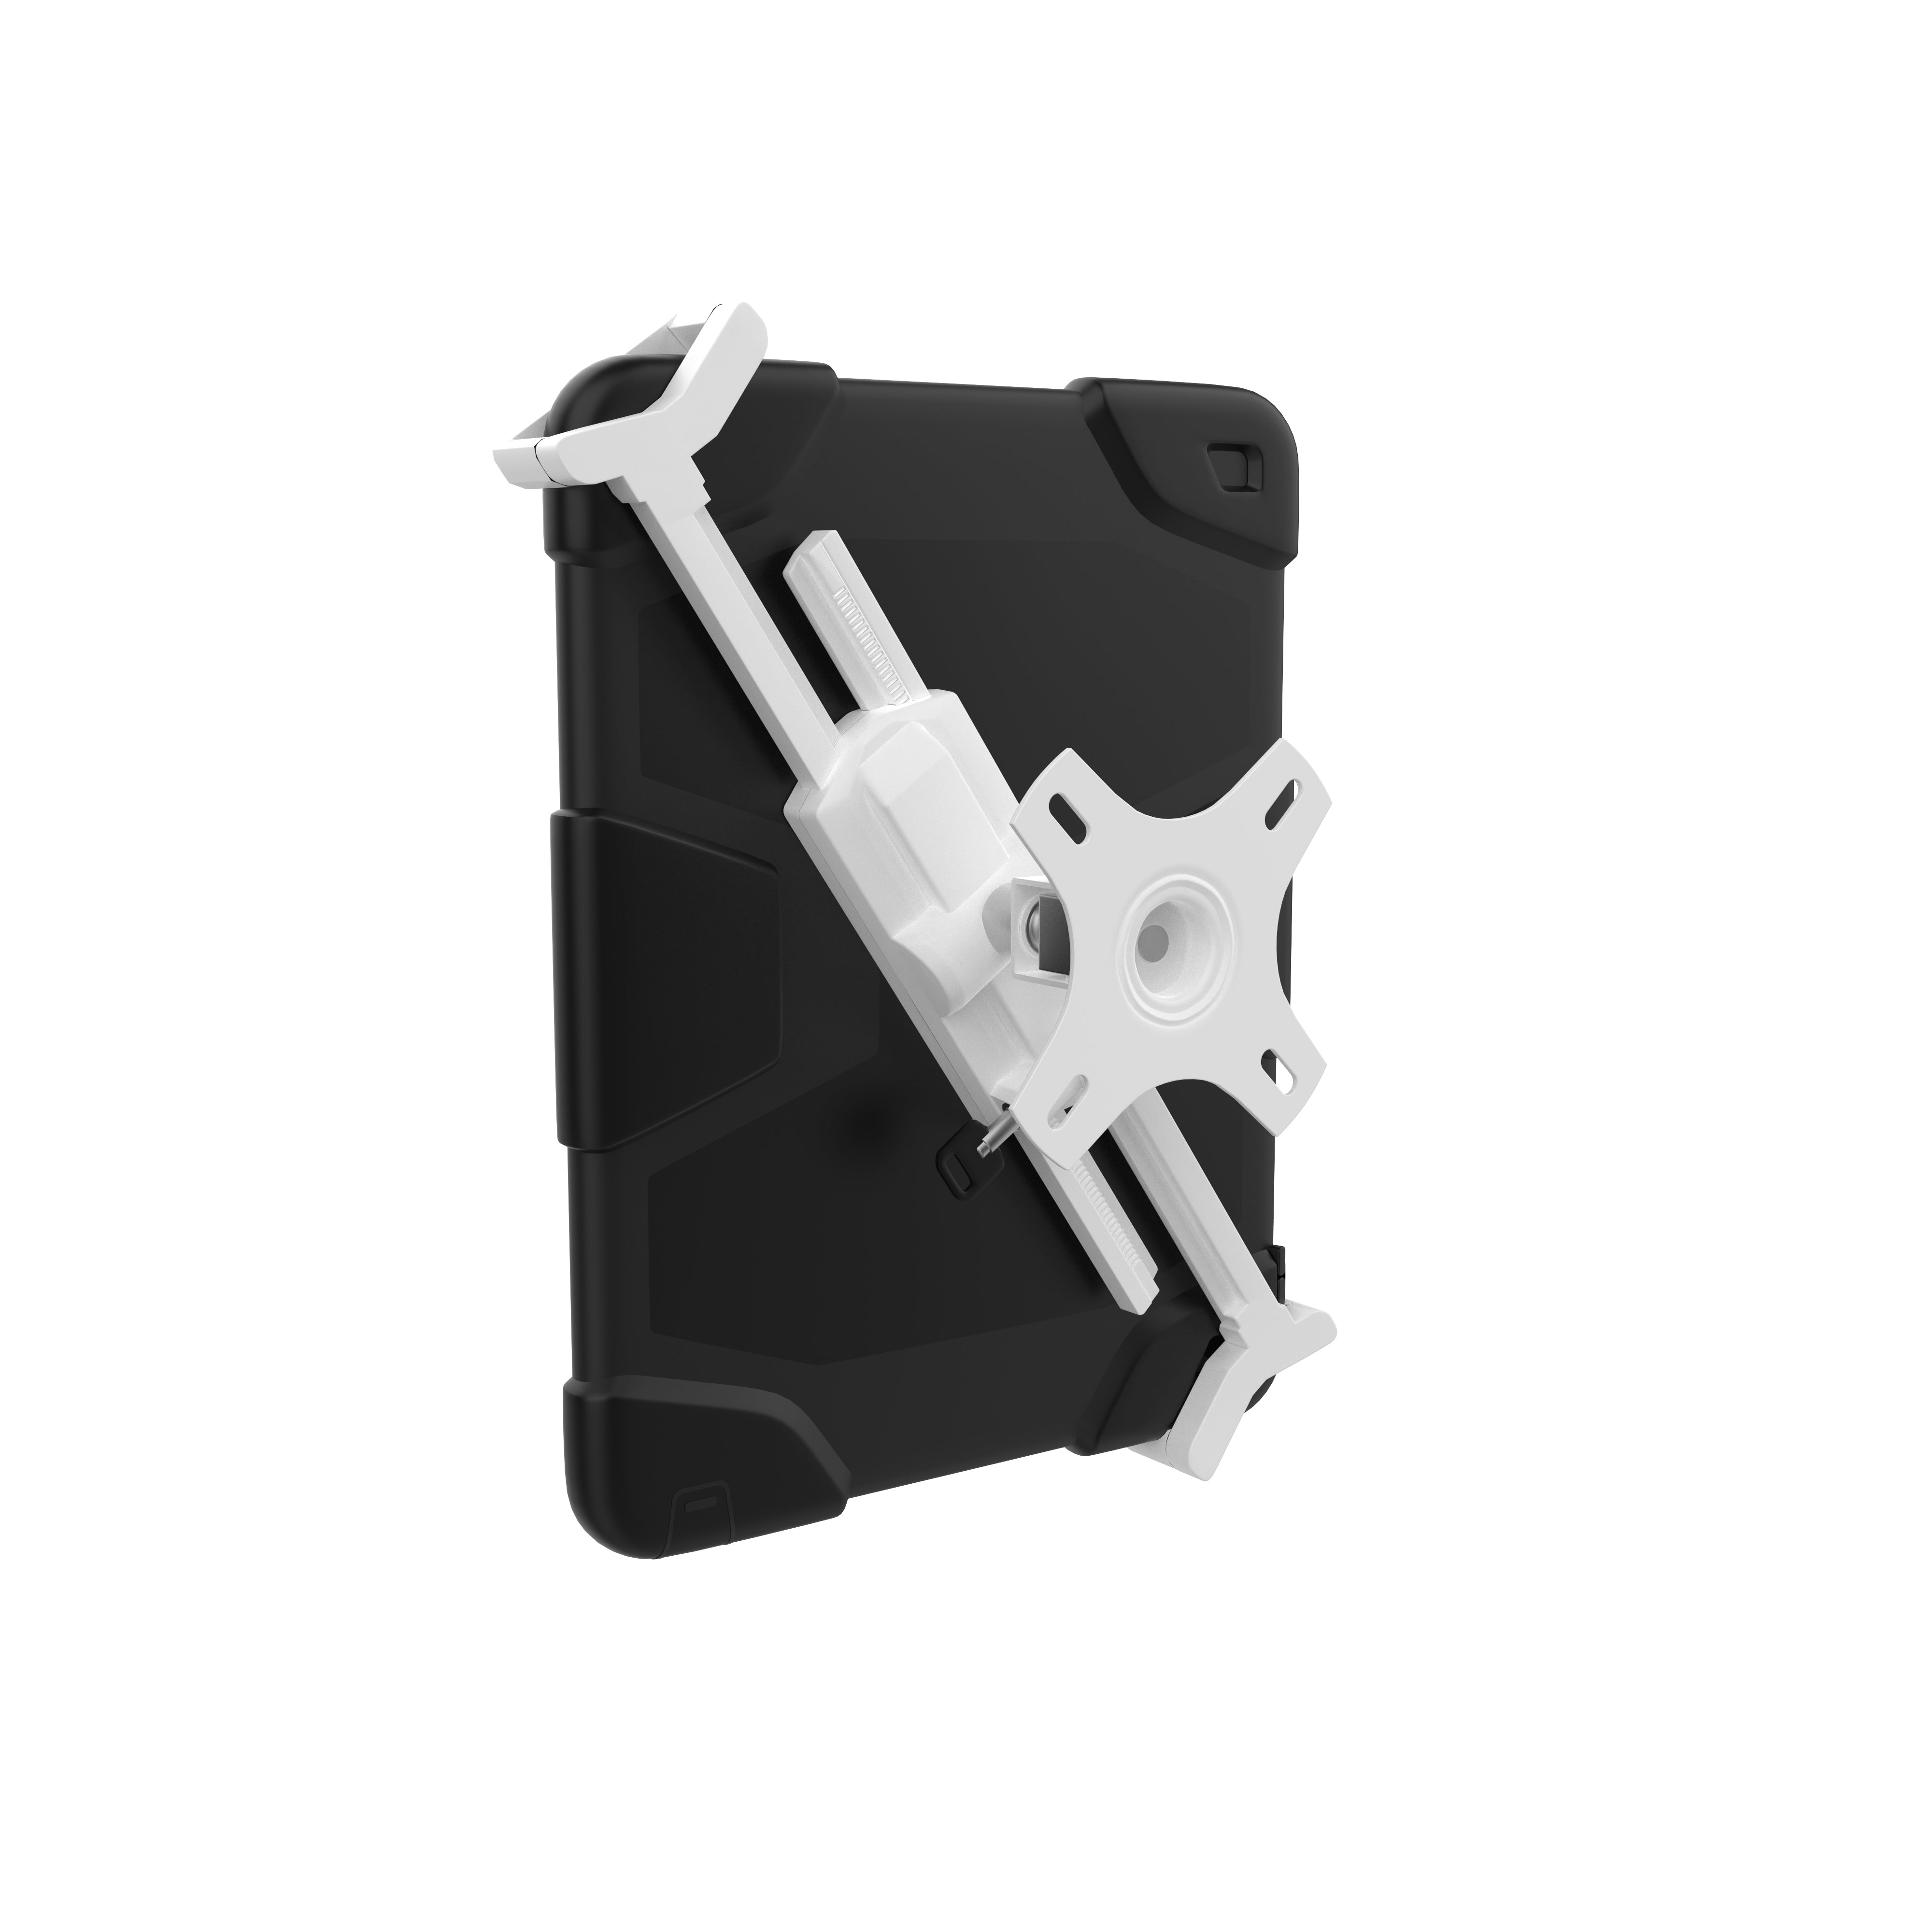 Security VESA and Wall Mount for 7-14 Inch Tablets, including for iPad 10.2", iPad Air & iPad Pro 11" - M2/M4, iPad Air & iPad Pro 13" - M2/M4 and More